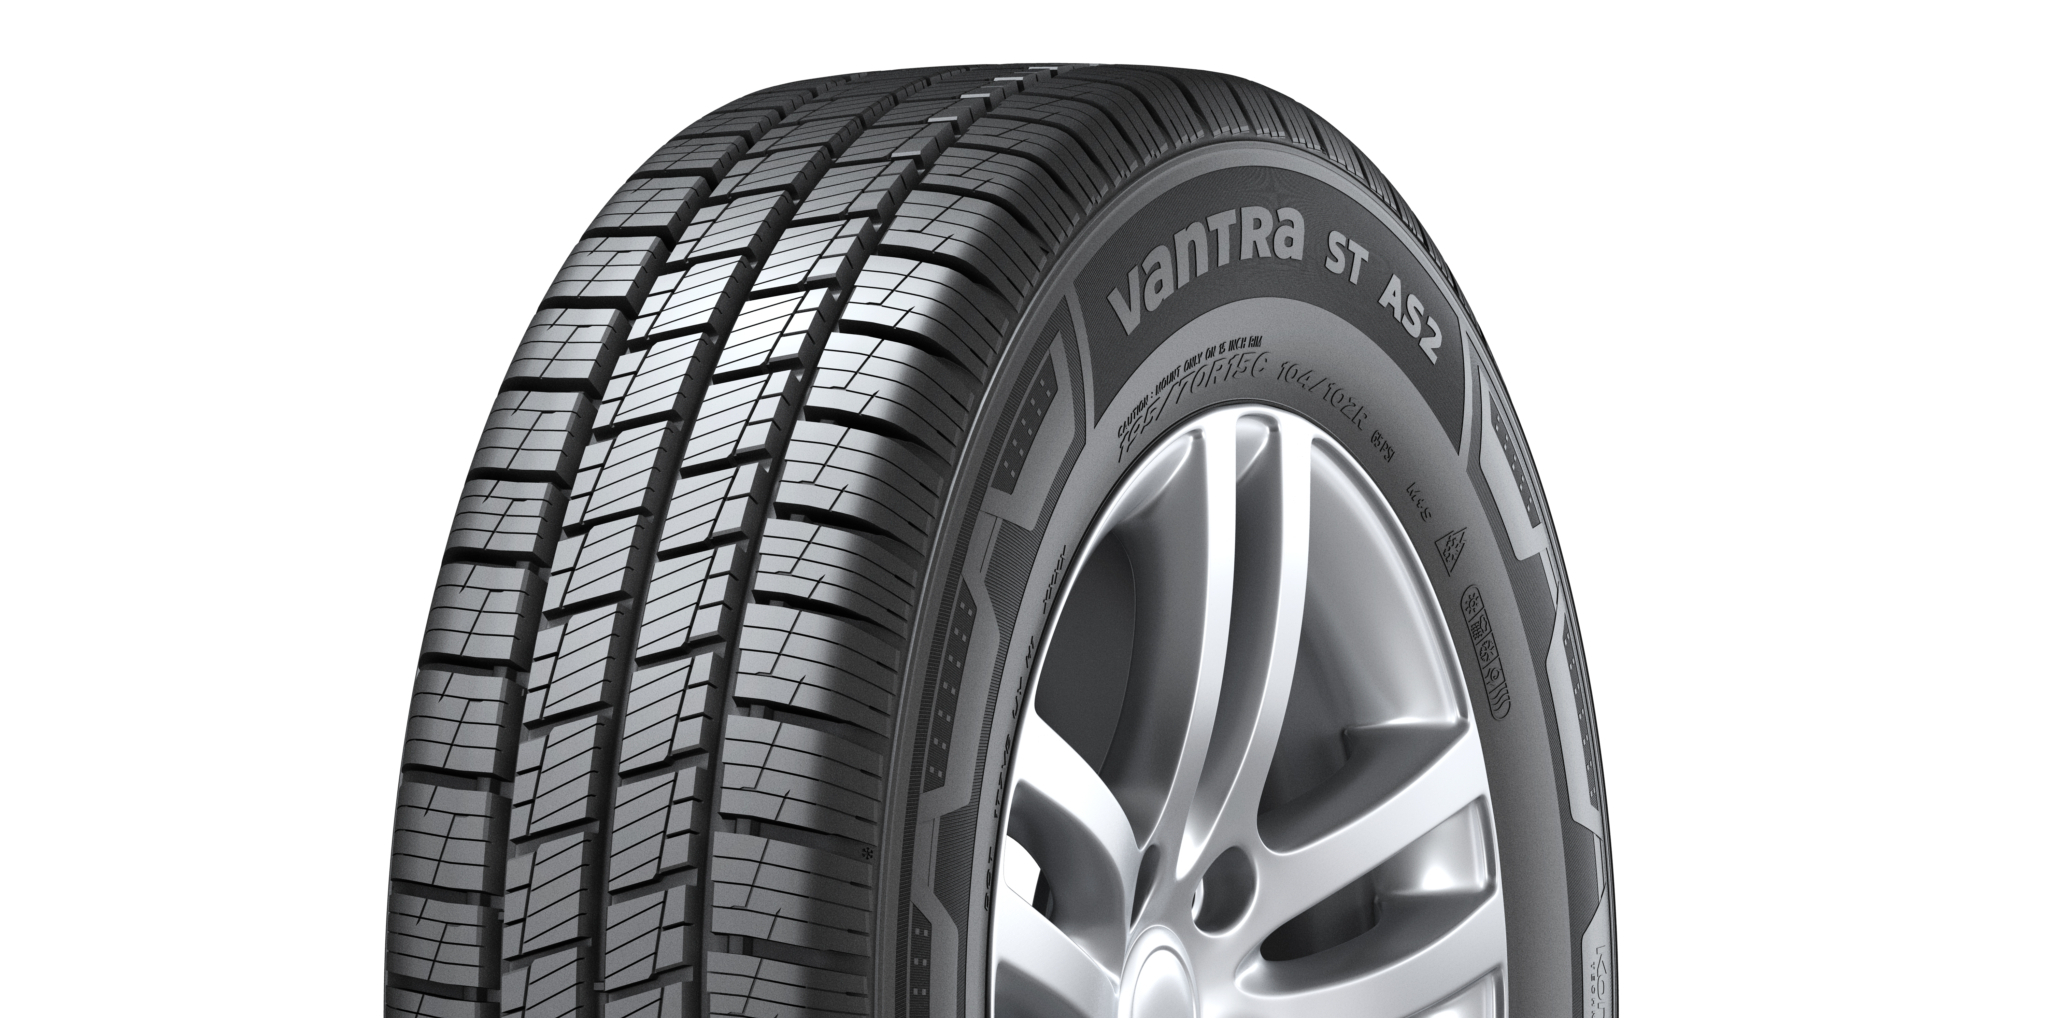 Hankook Vantra tyre range targets efficiency, safety and durability for light commercial vehicles